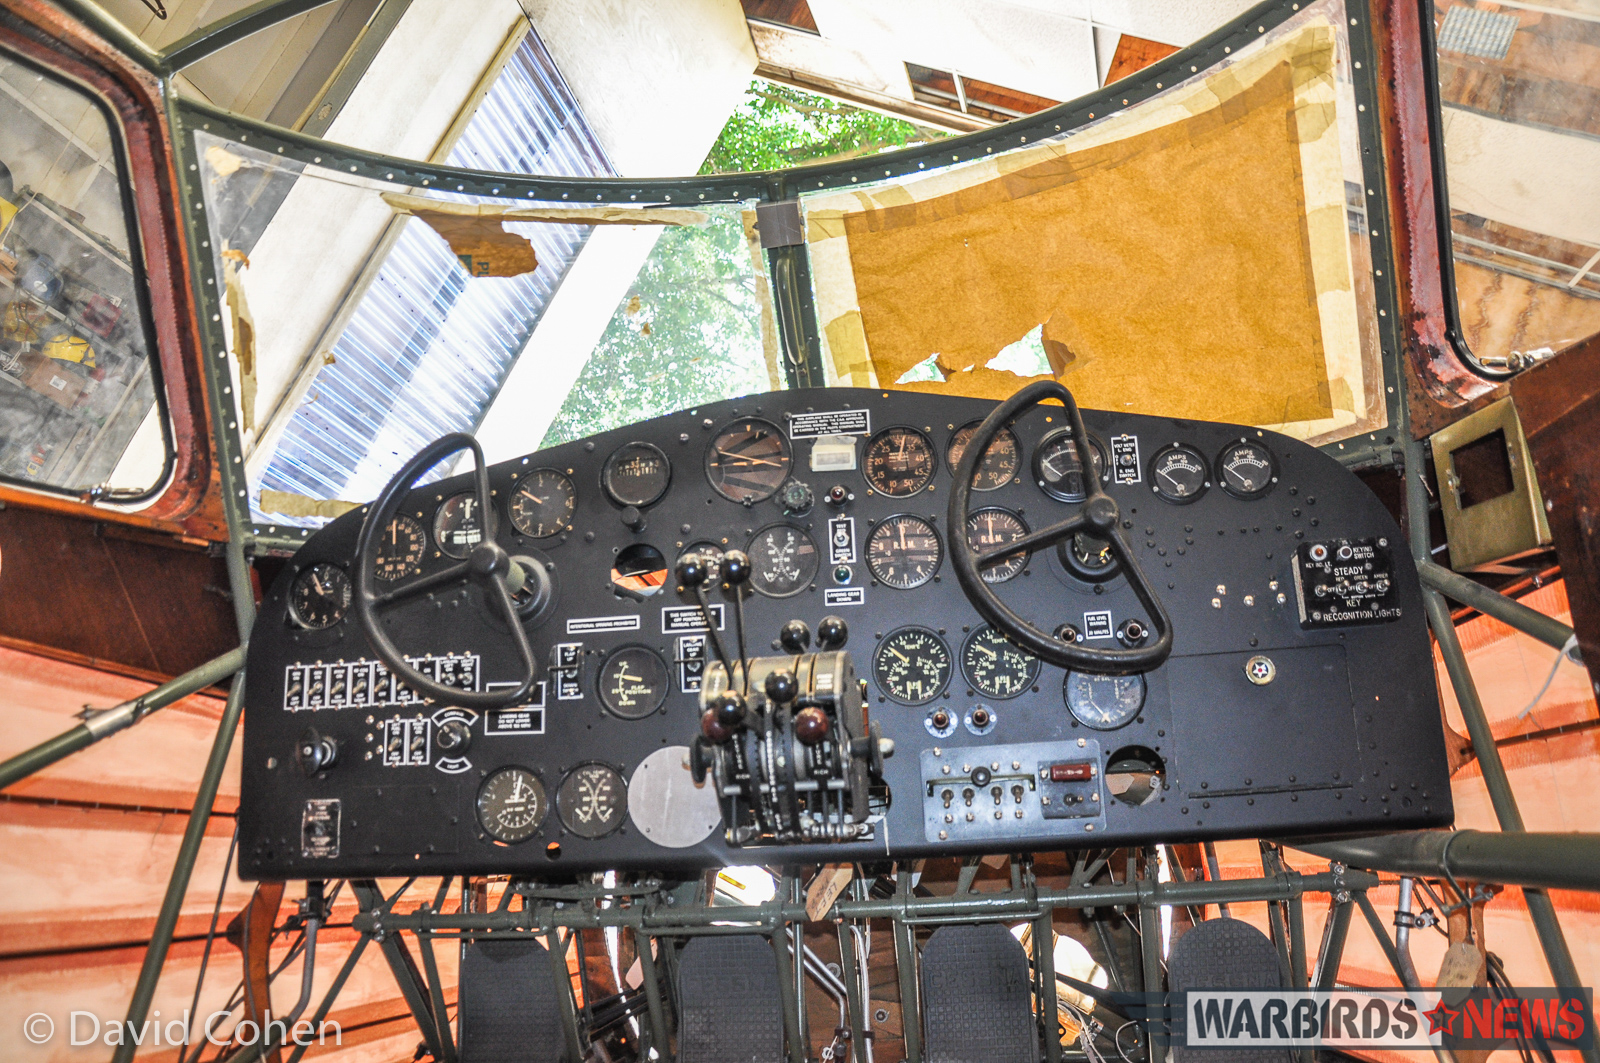 The beautifully restored instrument panel installed in the overhauled cockpit. (Photo by David Cohen)